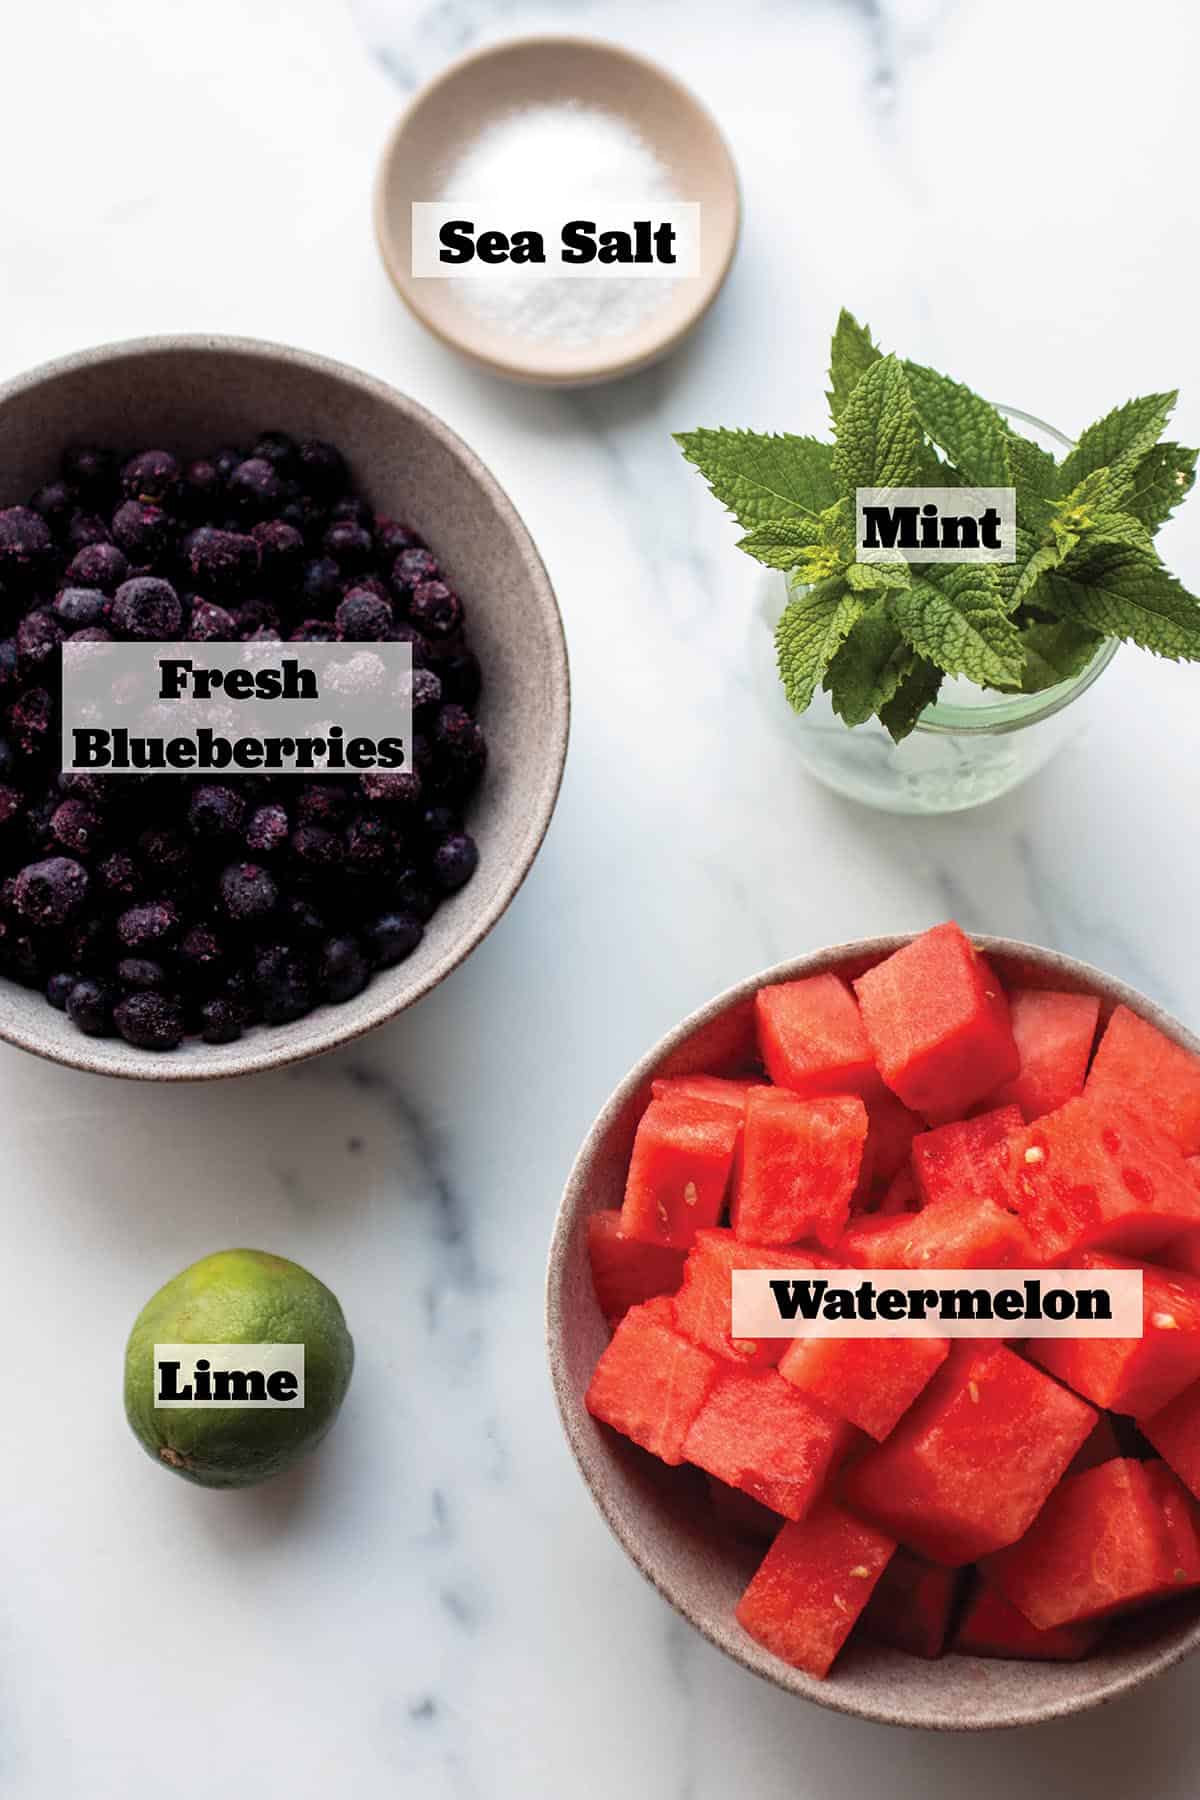 A bowl of diced watermelon, bowl of blueberries, fresh mint, a lime and dish of sea salt.